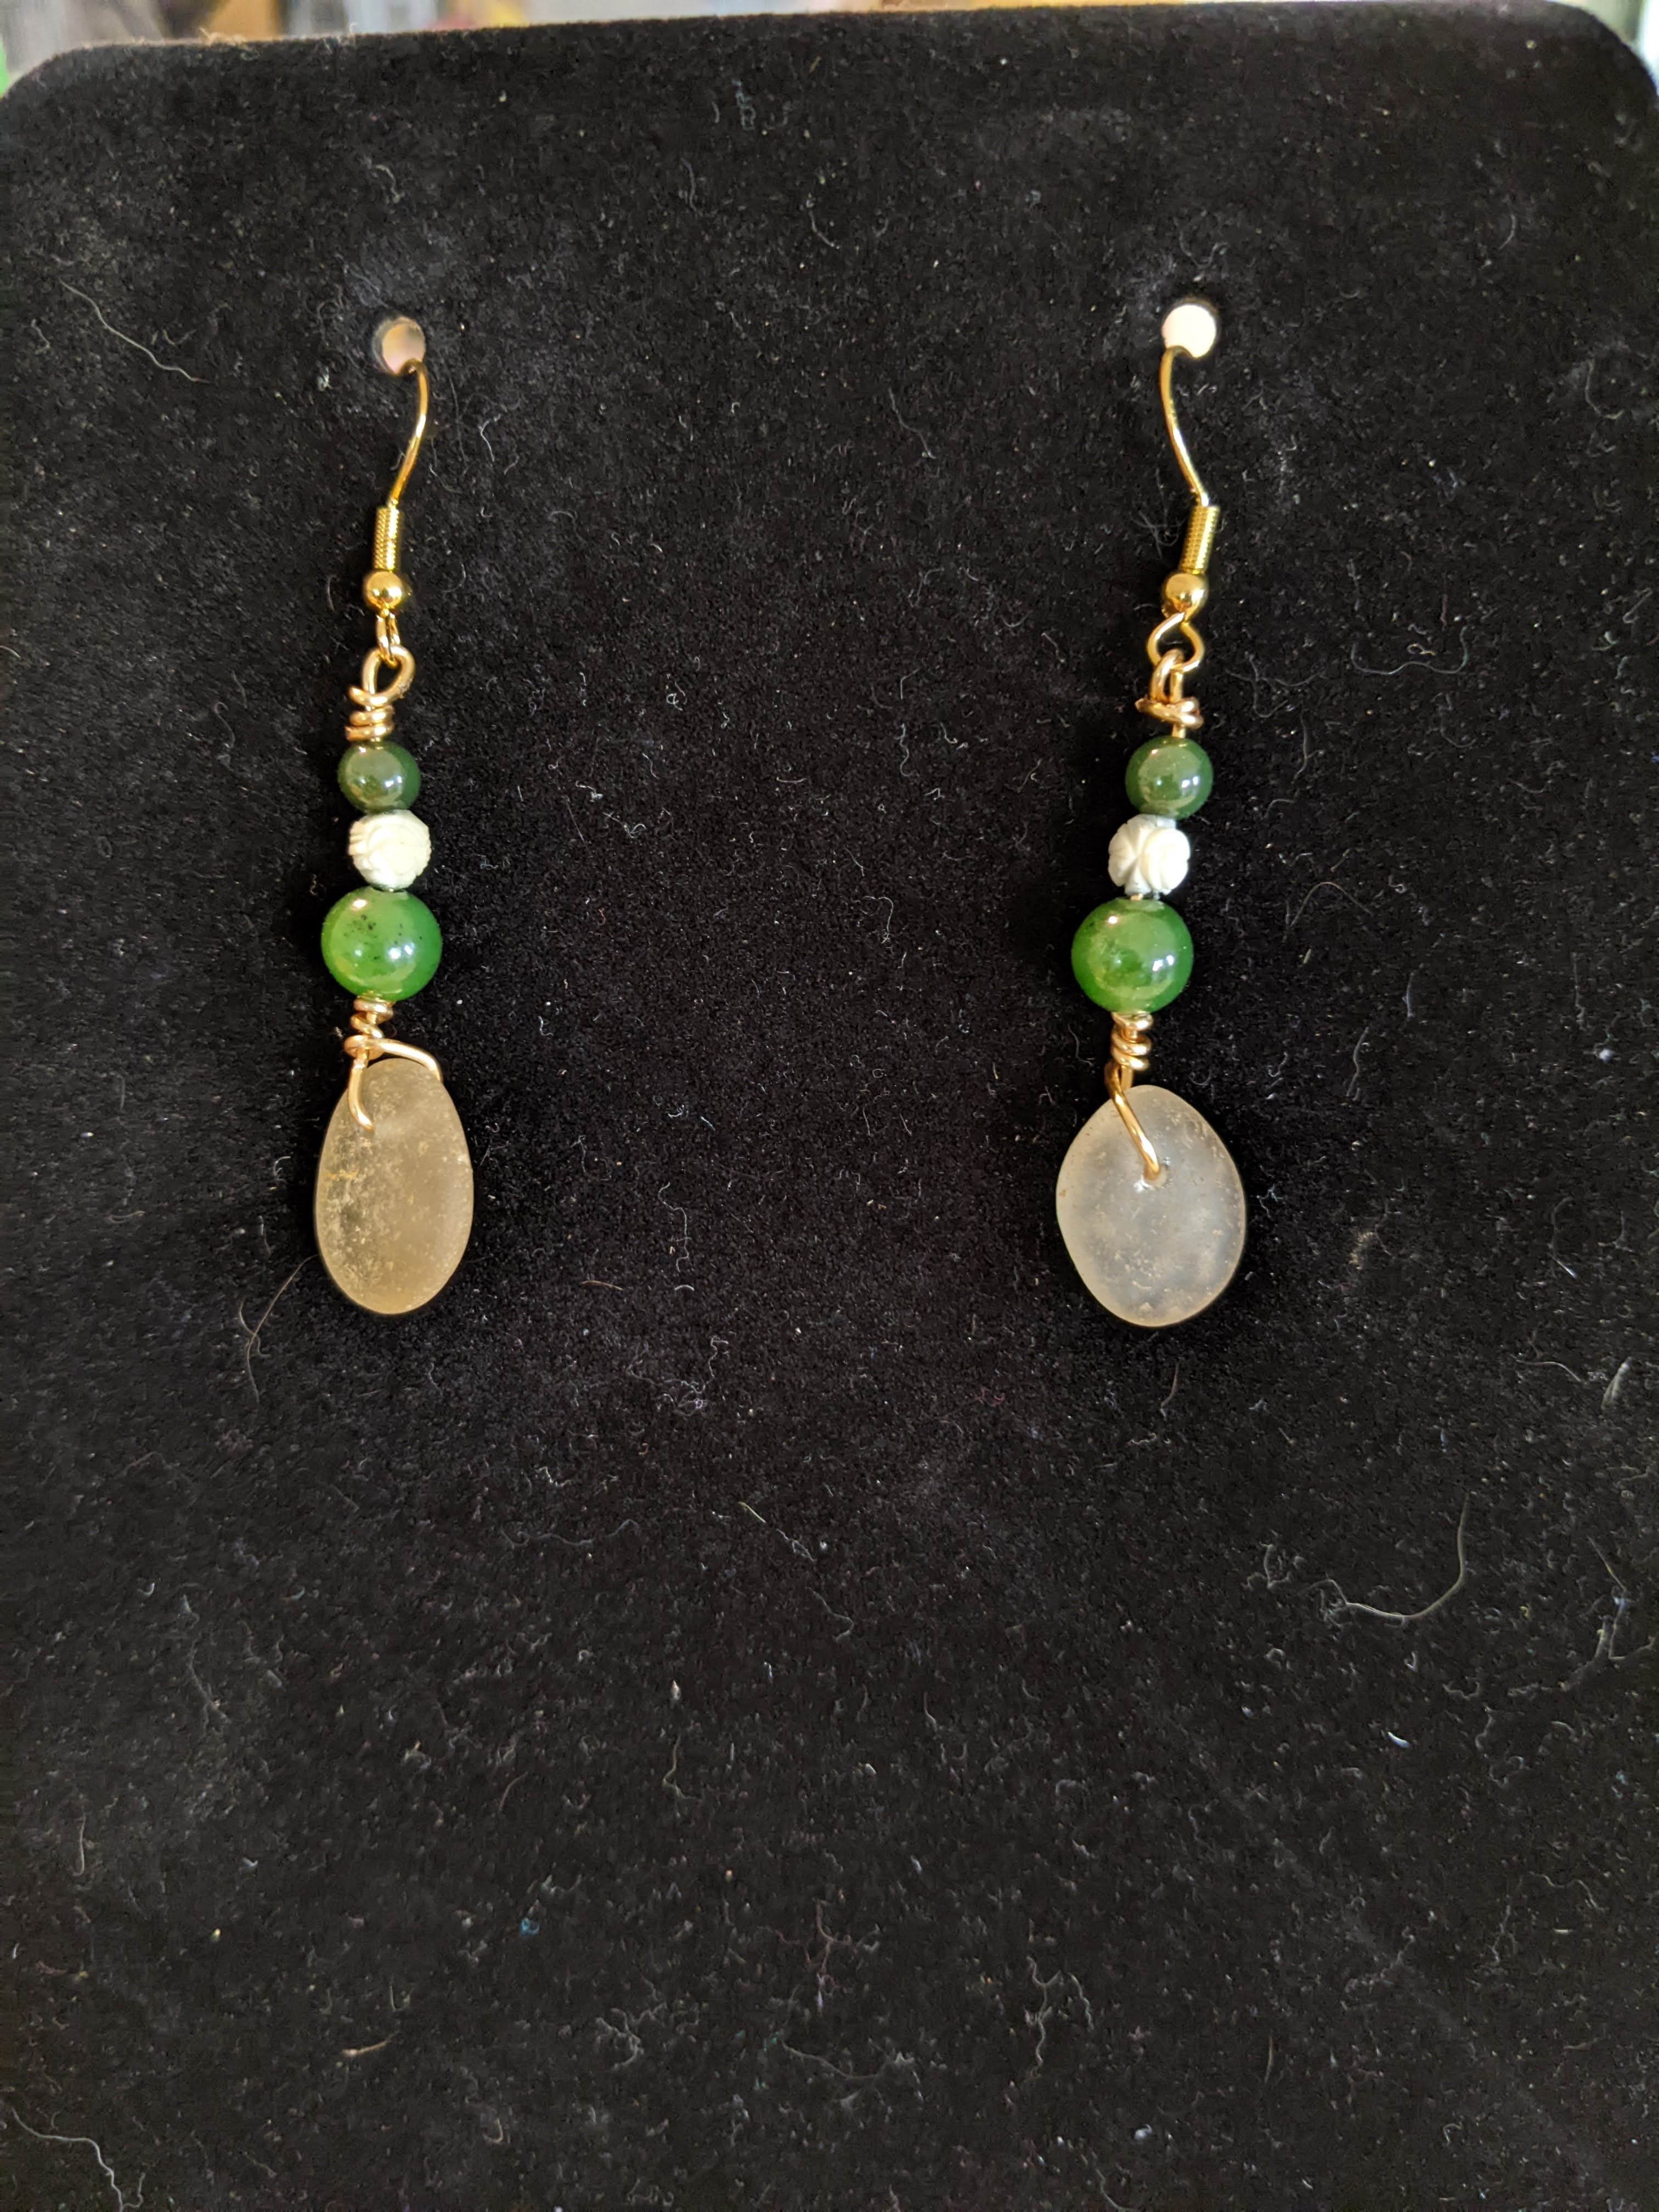 Pastel yellow seaglass and green beads earrings